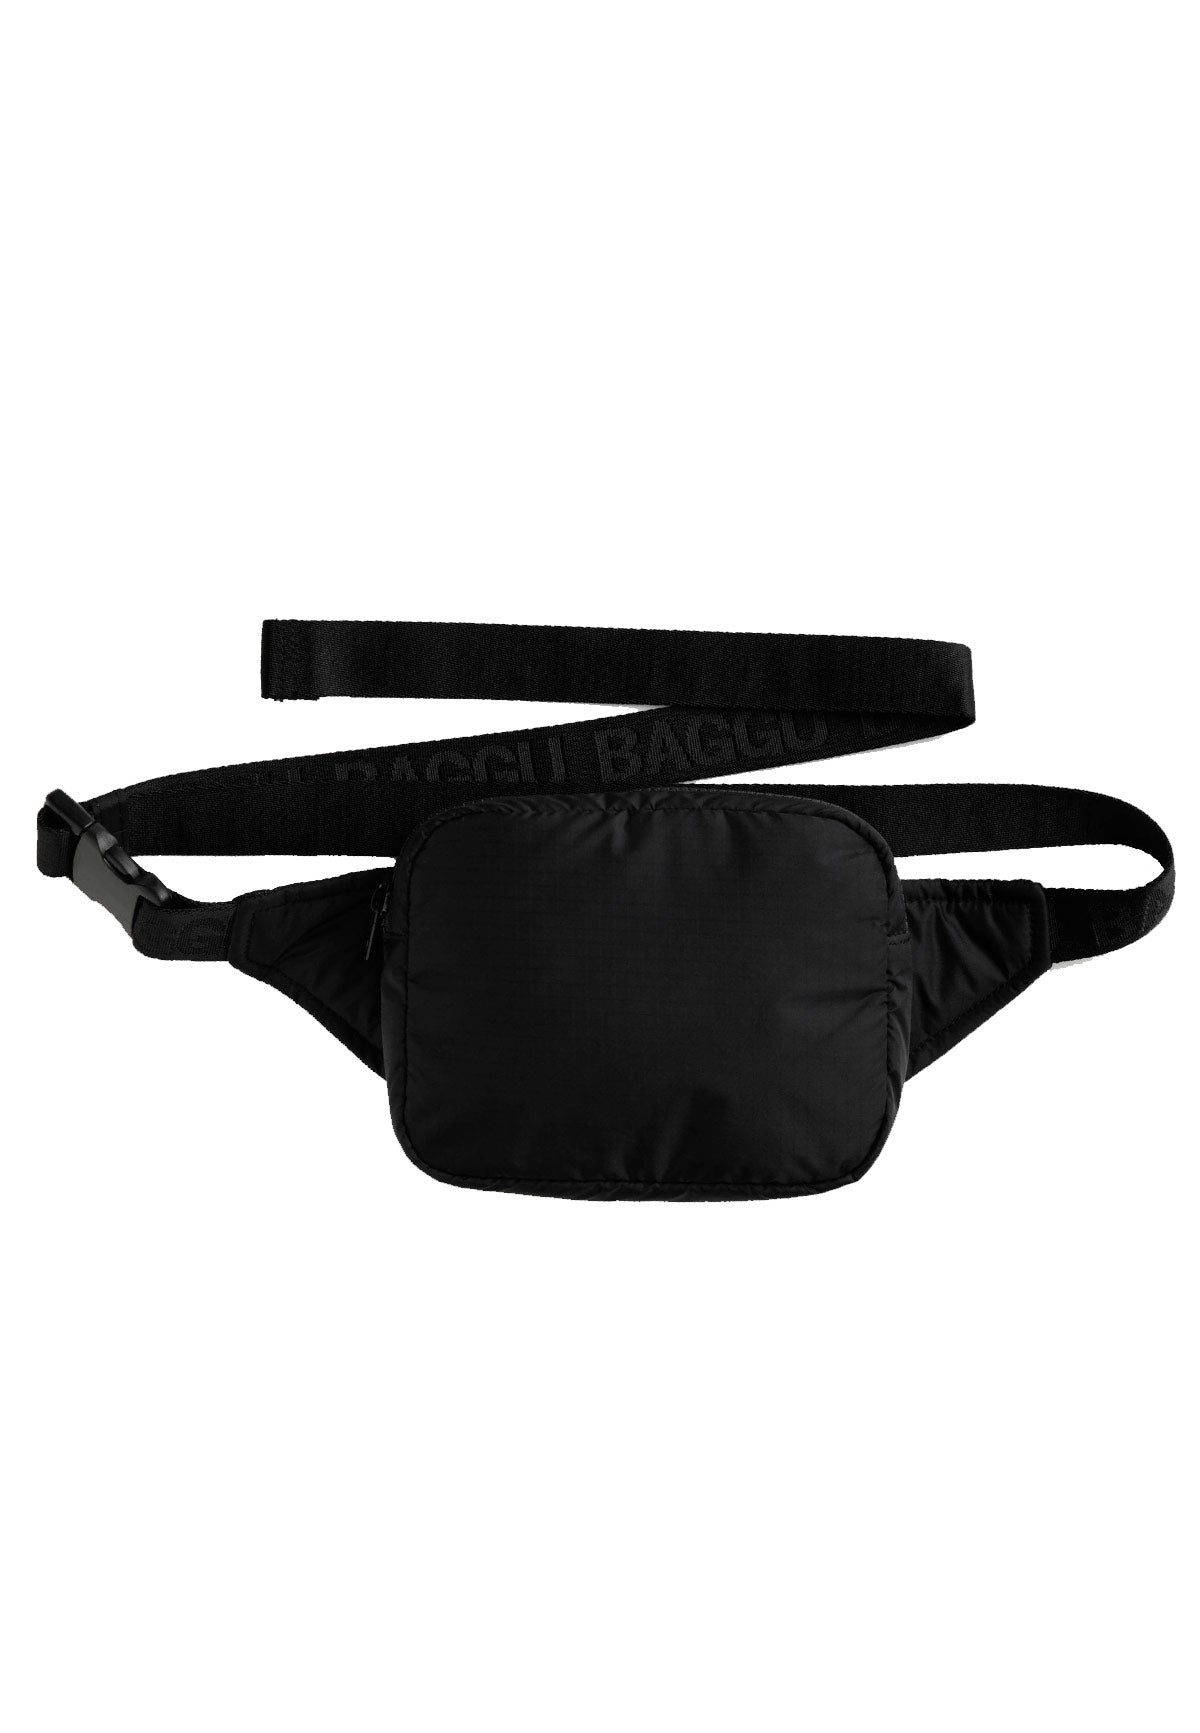 PUFFY FANNY PACK BLACK